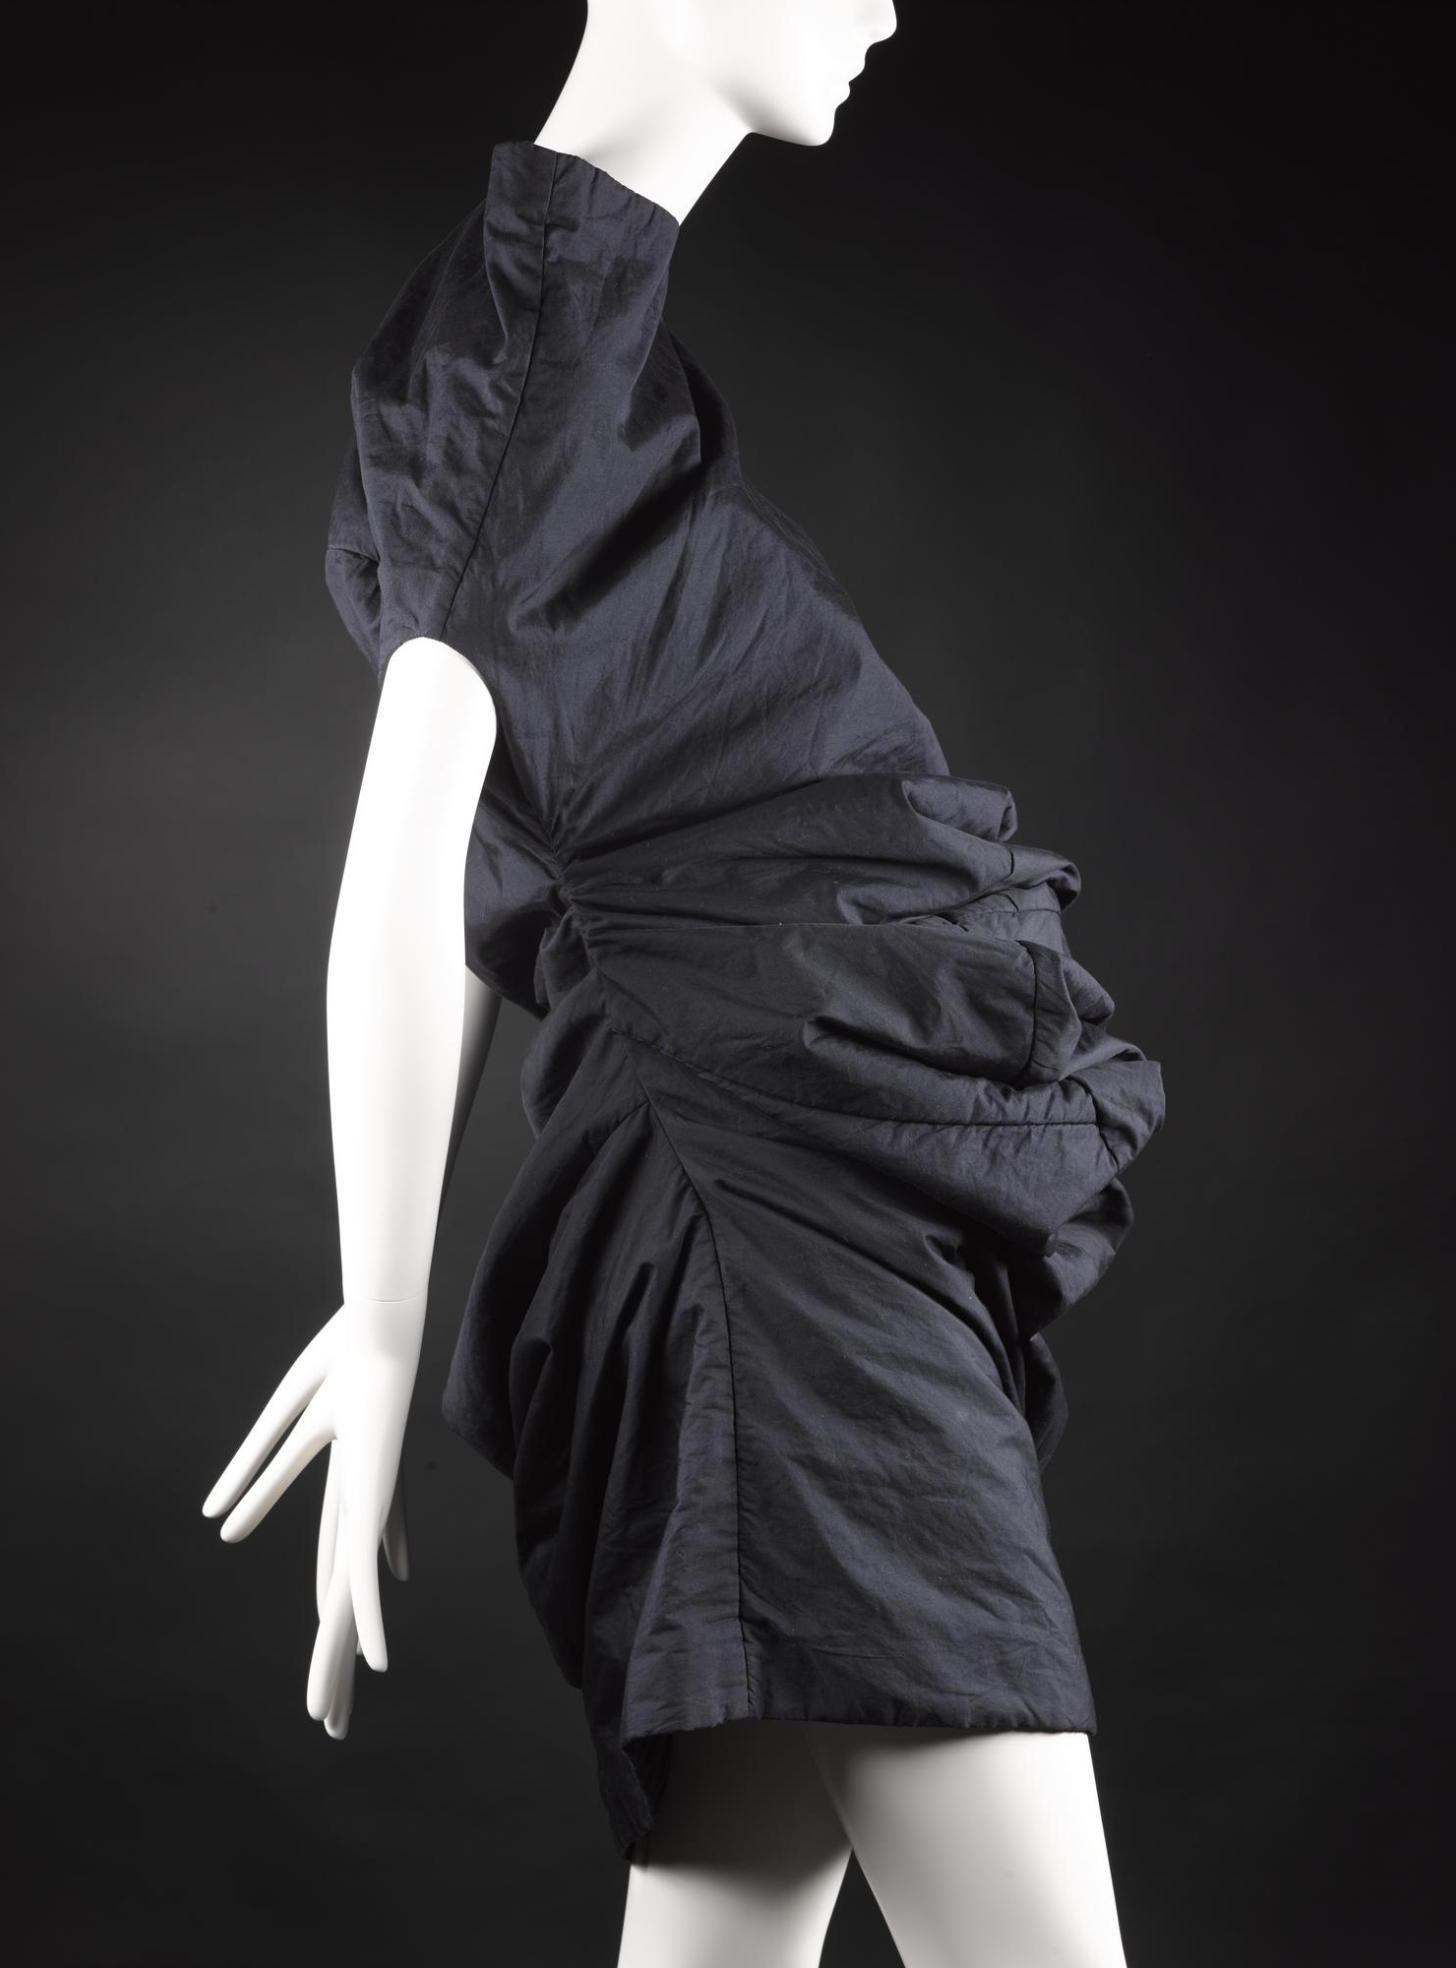 Dress from 'Body Meets Dress' or 'Bump' collection, of blue/black polyester and cotton, padded with tulle, designed by Rei Kawakubo for Comme des Garçons, Spring/Summer 1997.